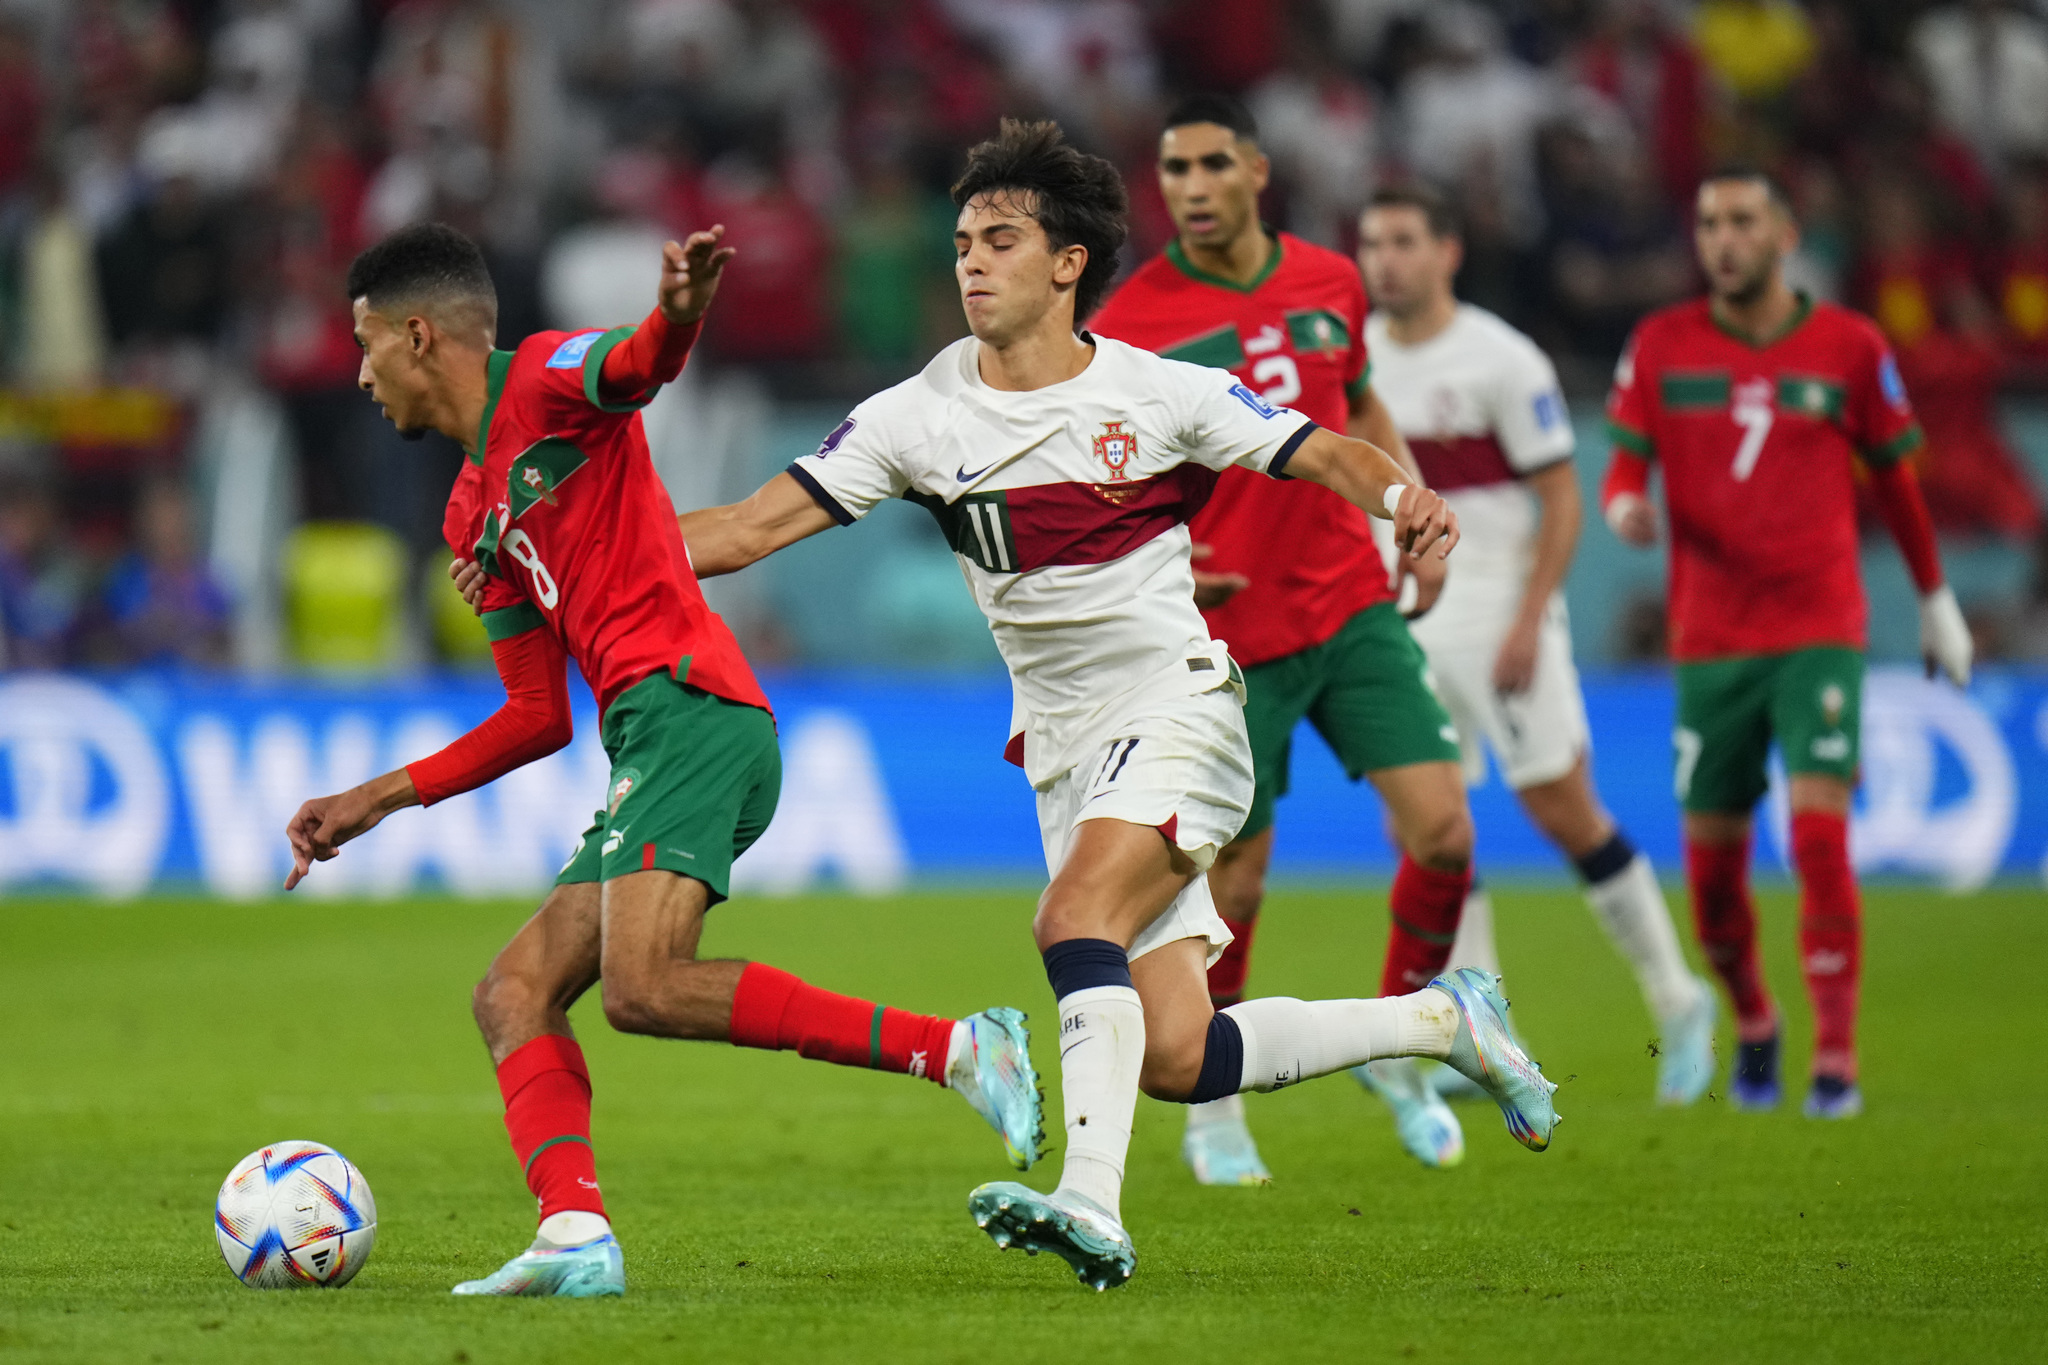 Morocco's Azzedine Ounahi, left, is challenged by  lt;HIT gt;Portugal lt;/HIT gt;'s Joao Felix during the World Cup quarterfinal soccer match between Morocco and  lt;HIT gt;Portugal lt;/HIT gt;, at Al Thumama Stadium in Doha, Qatar, Saturday, Dec. 10, 2022. (AP Photo/Petr David Josek)